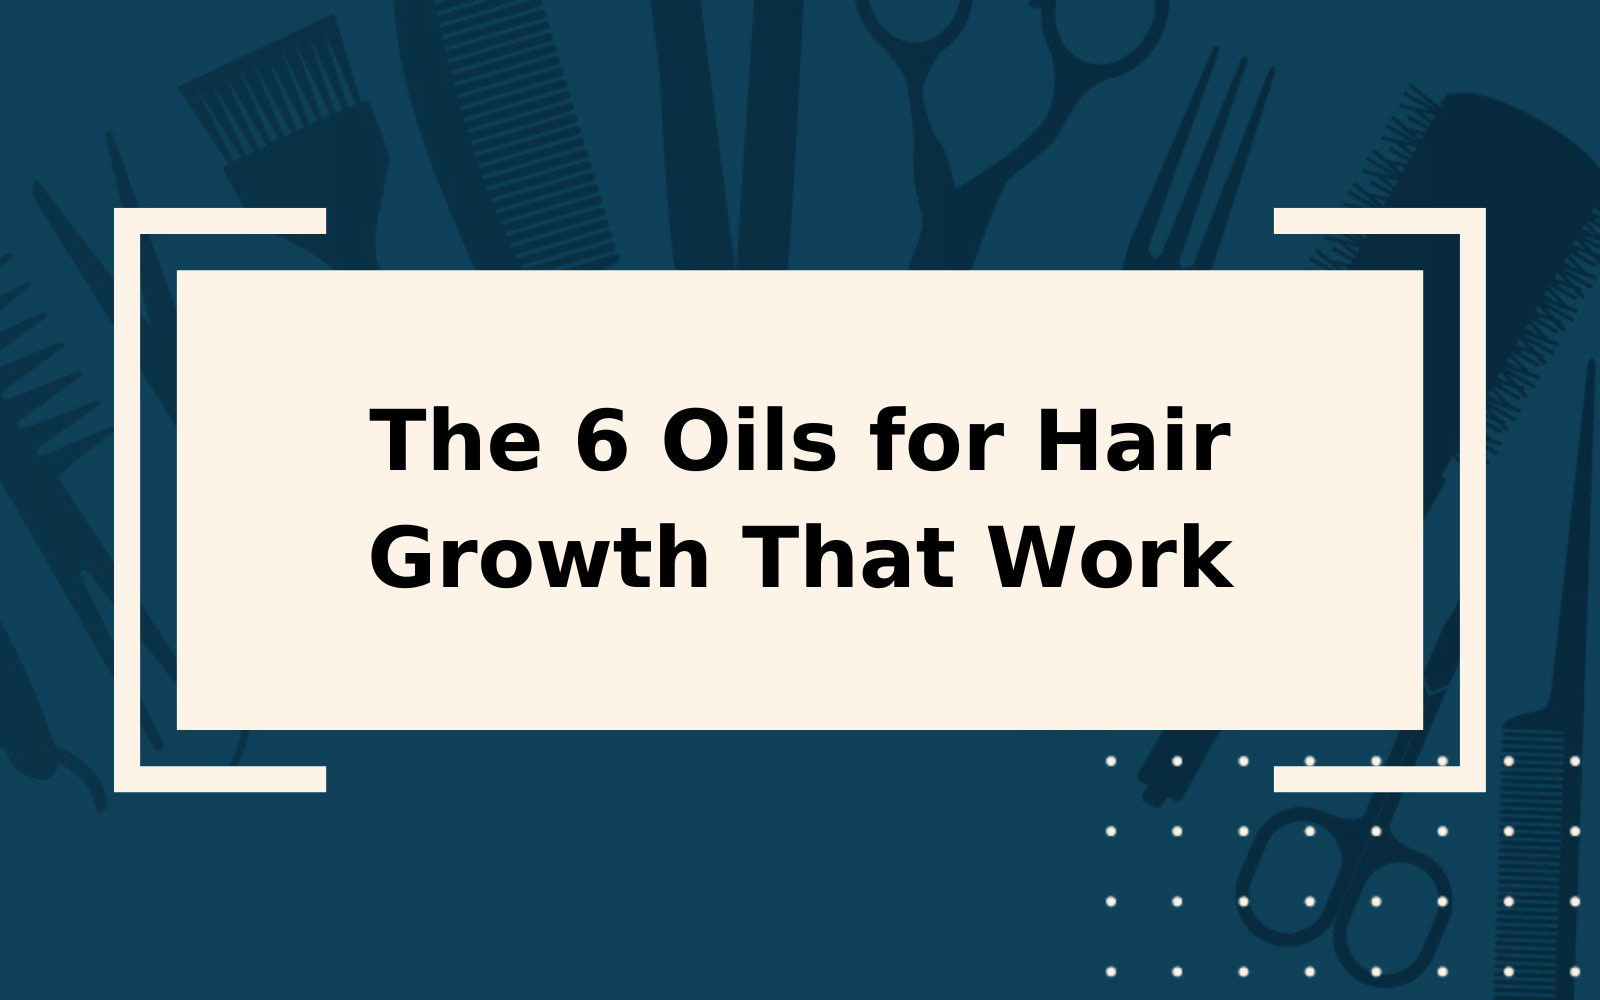 The 6 Oils for Hair Growth That Work in 2022